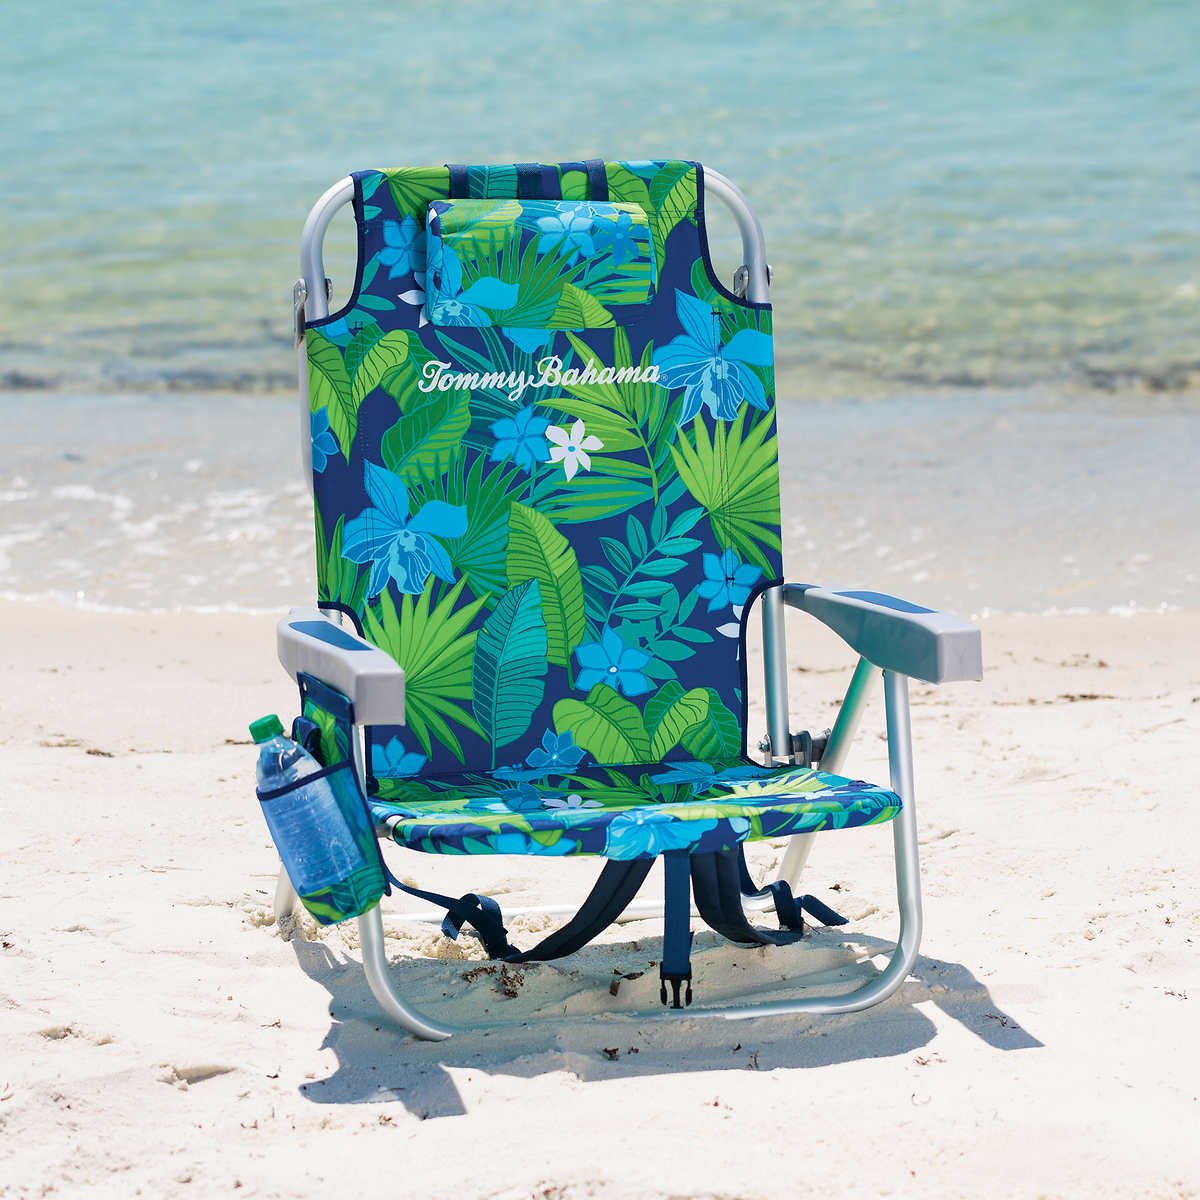 Tommy Bahama 2016 Backpack Cooler Chair with Storage Pouch and Towel Bar